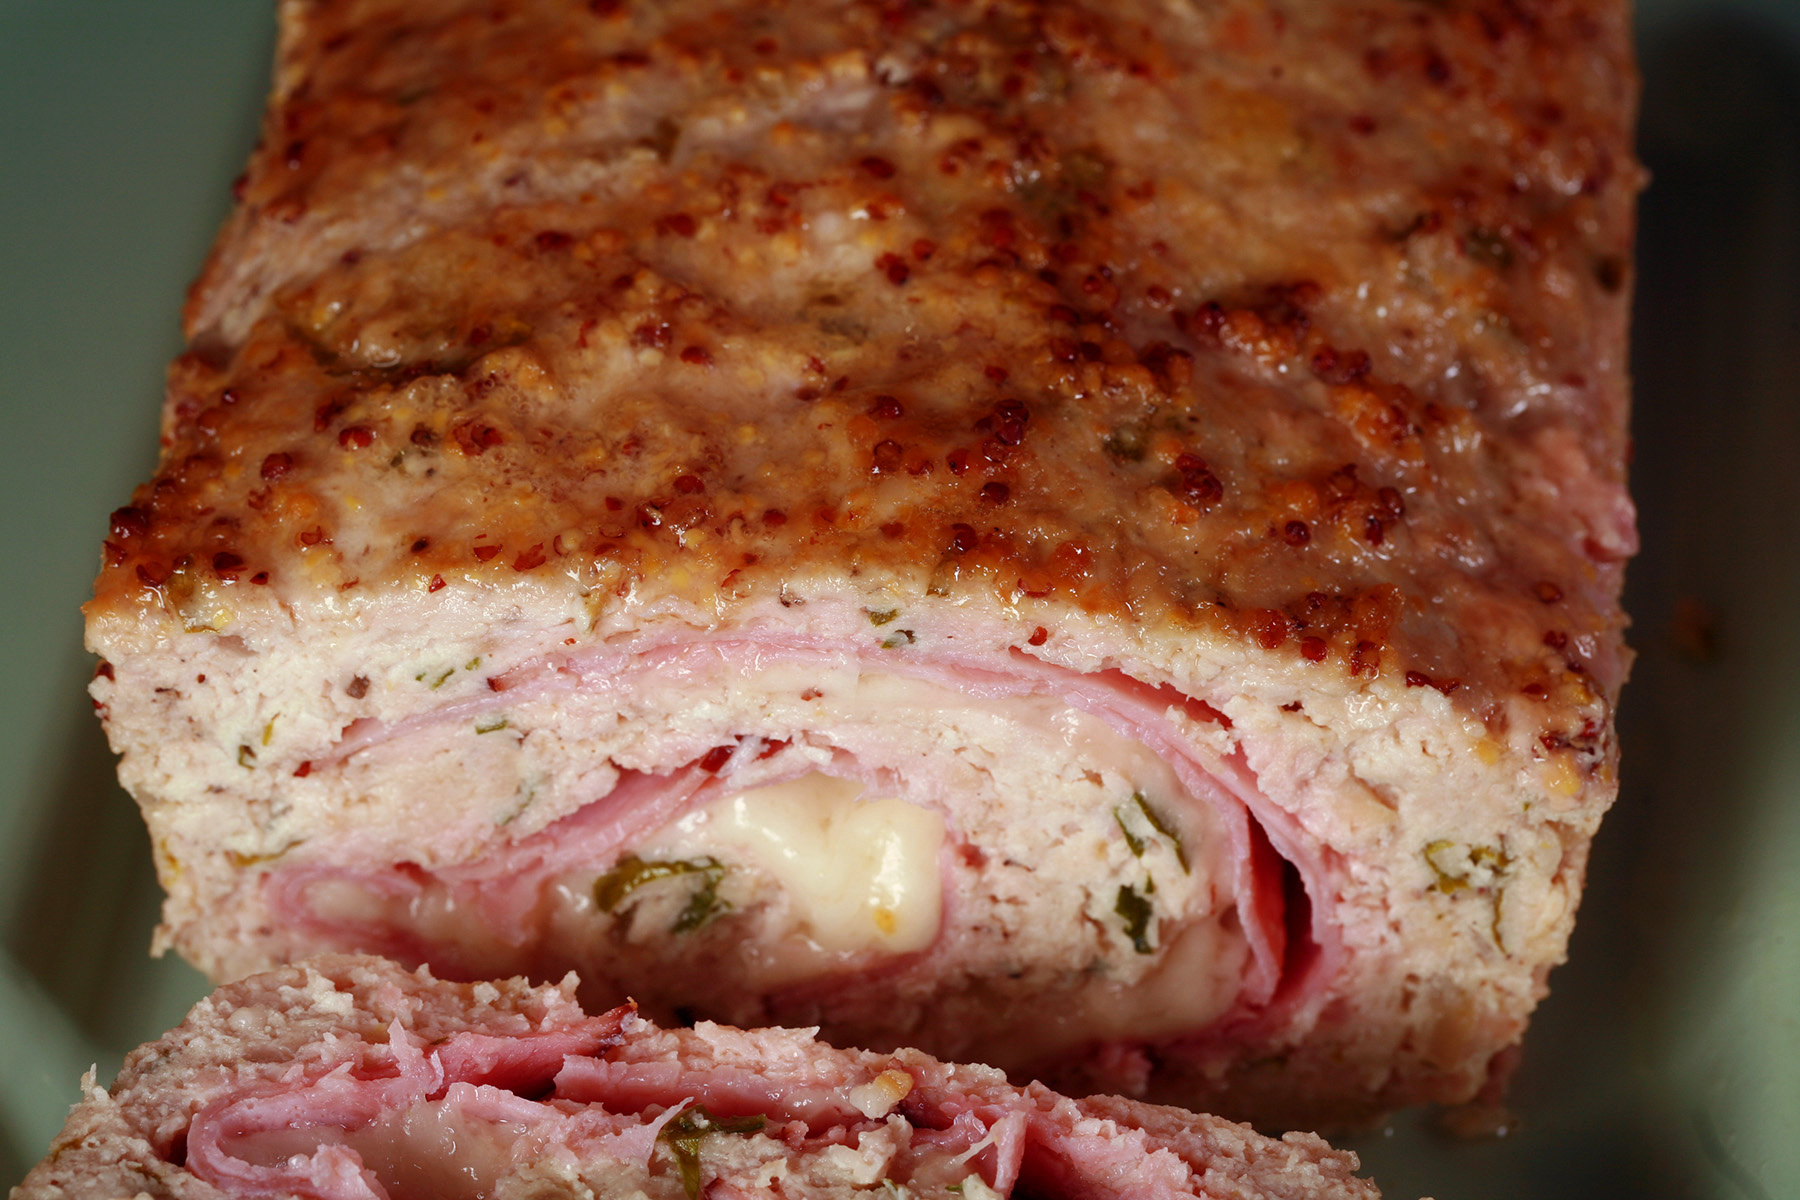 Low carb Chicken cordon bleu meatloaf, with a slice on a plate.